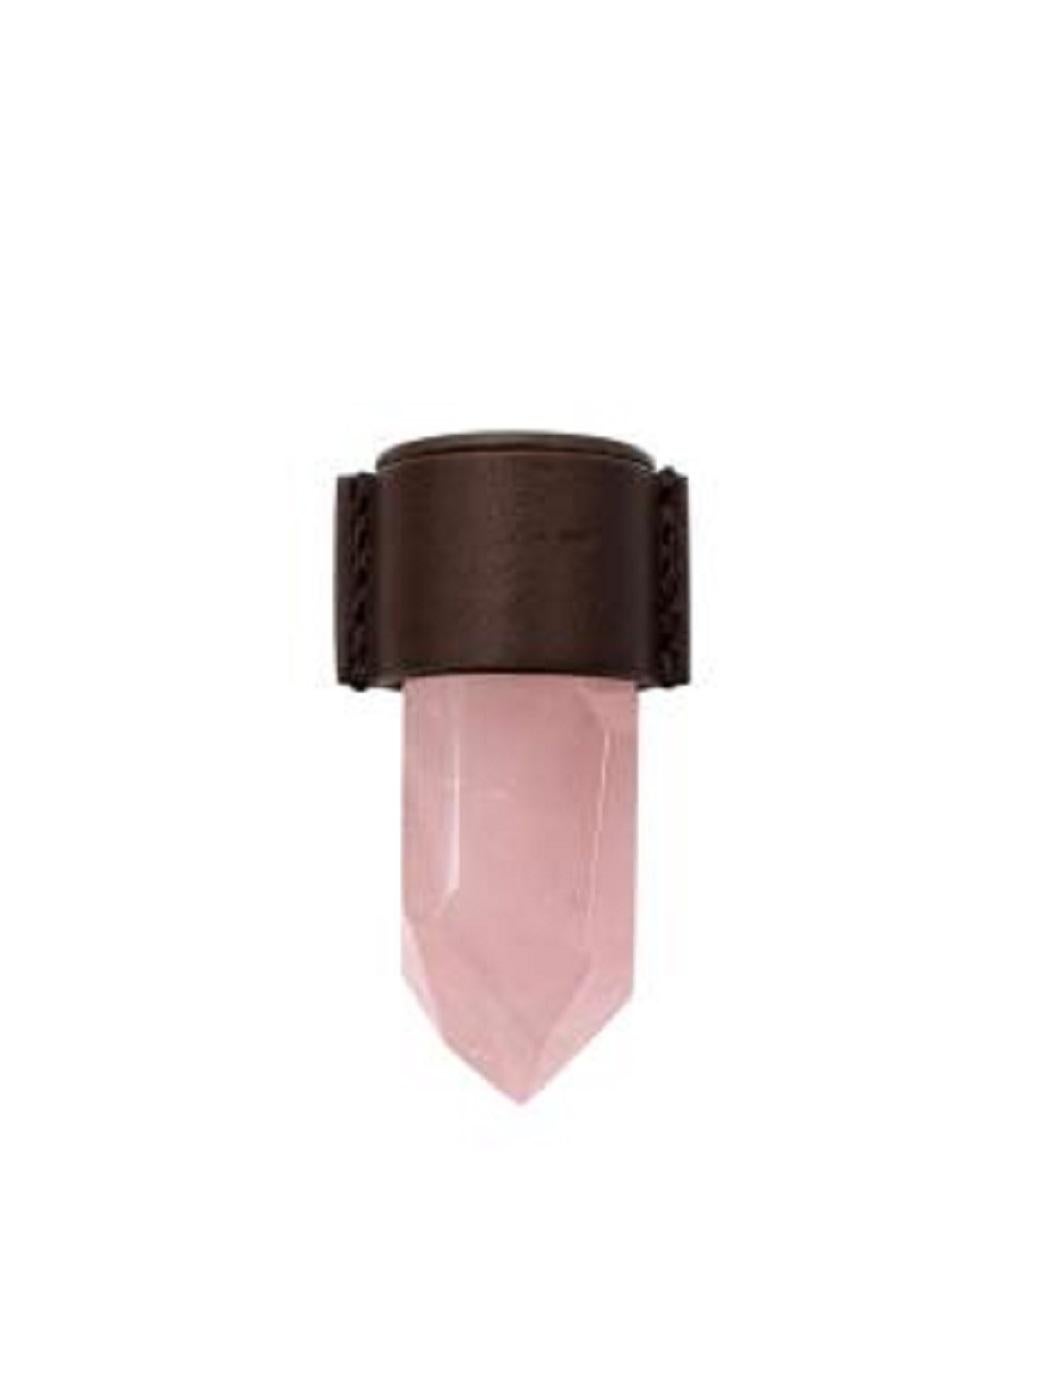 Chloe Jemma Rose Quartz Crystal

hand-cut rose quartz pendant in a leather casing-Mid weight construction 
A valuable amulet believed to promote universal love,
-Logo engraving to the base

Material: 

Leather 
Rose quartz 

PLEASE NOTE, THESE ITEMS